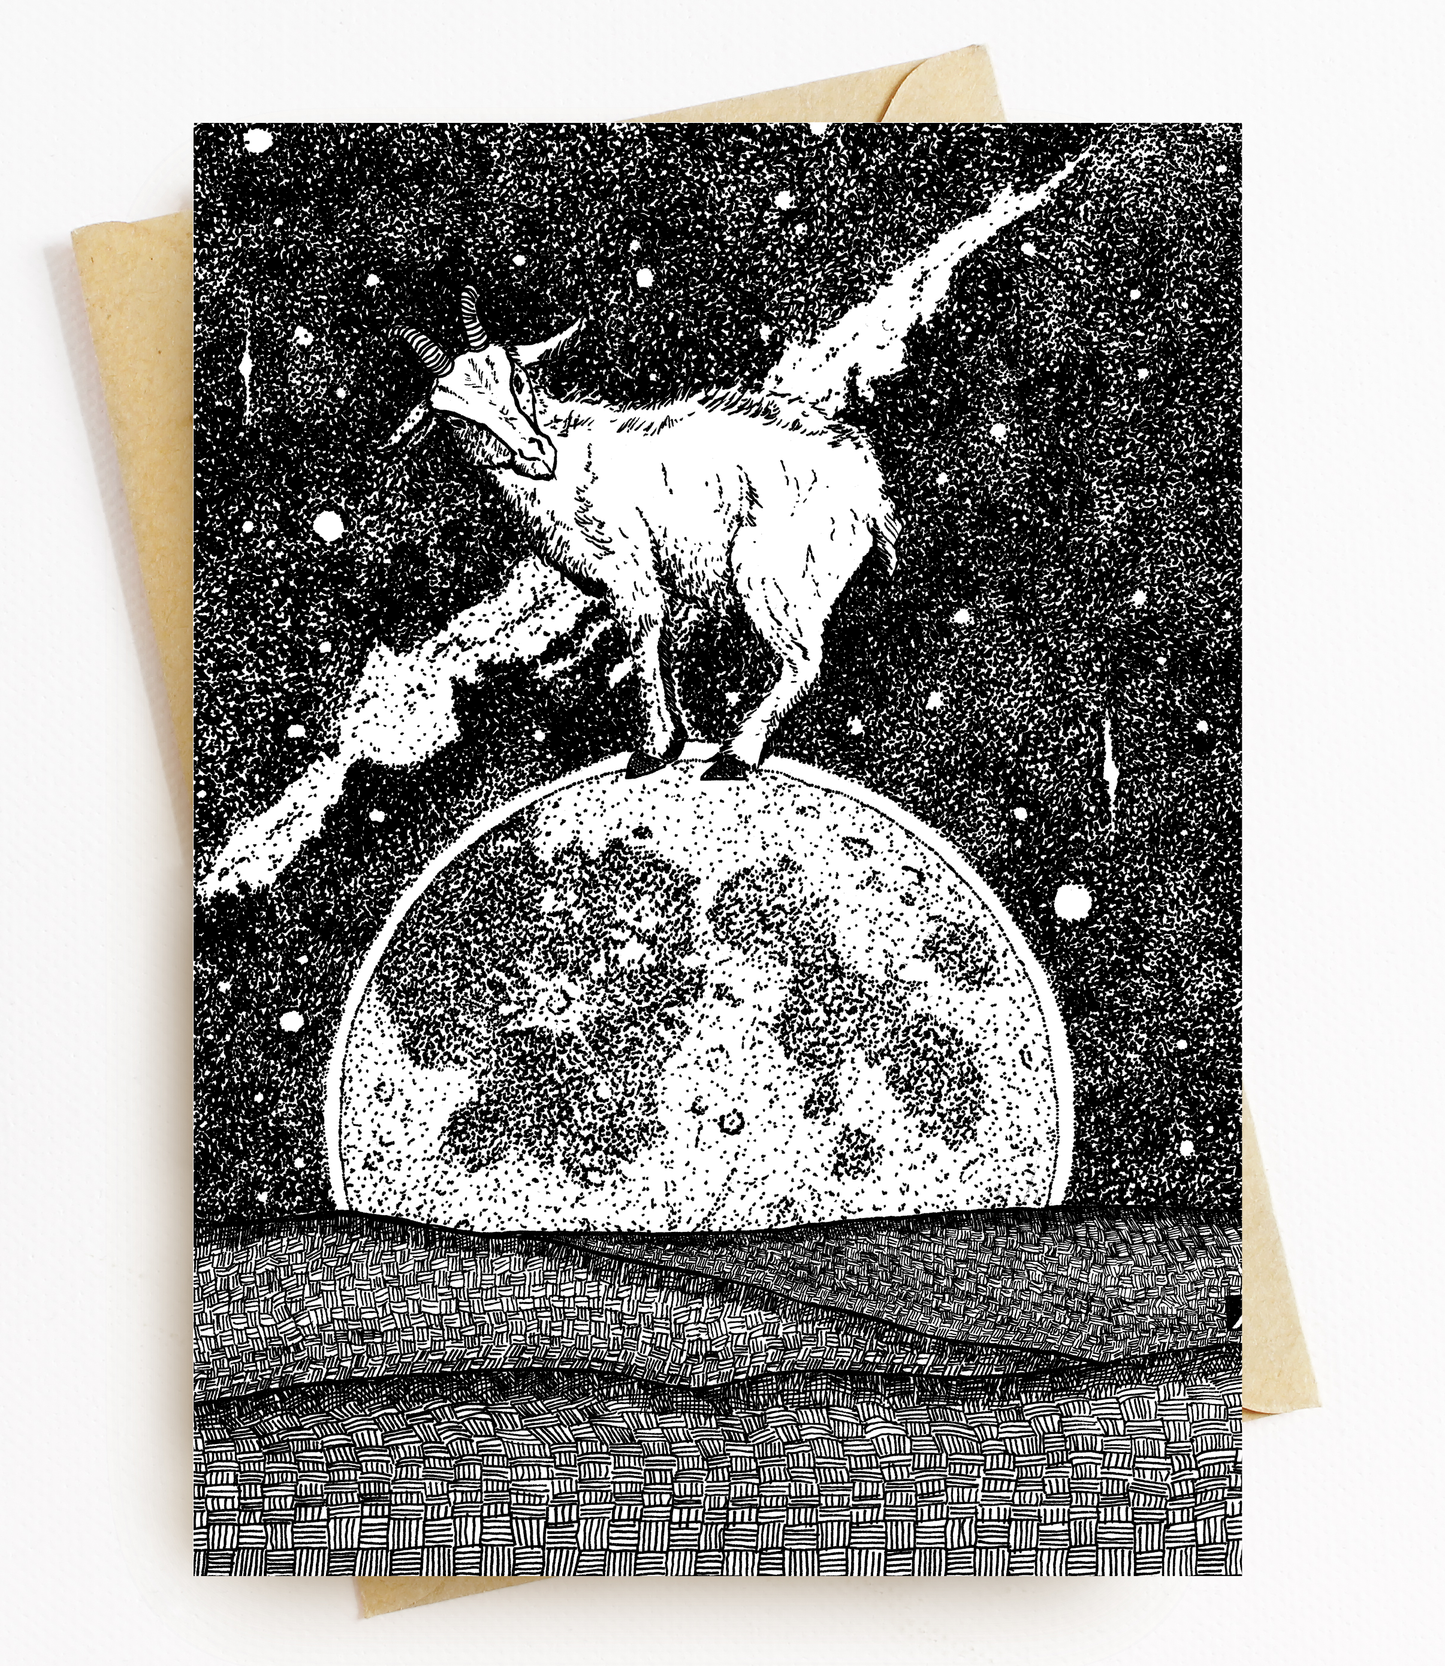 BellavanceInk: Greeting Card With A Pen & Ink Drawing Of A Goat Standing On The Moon 5 x 7 Inches